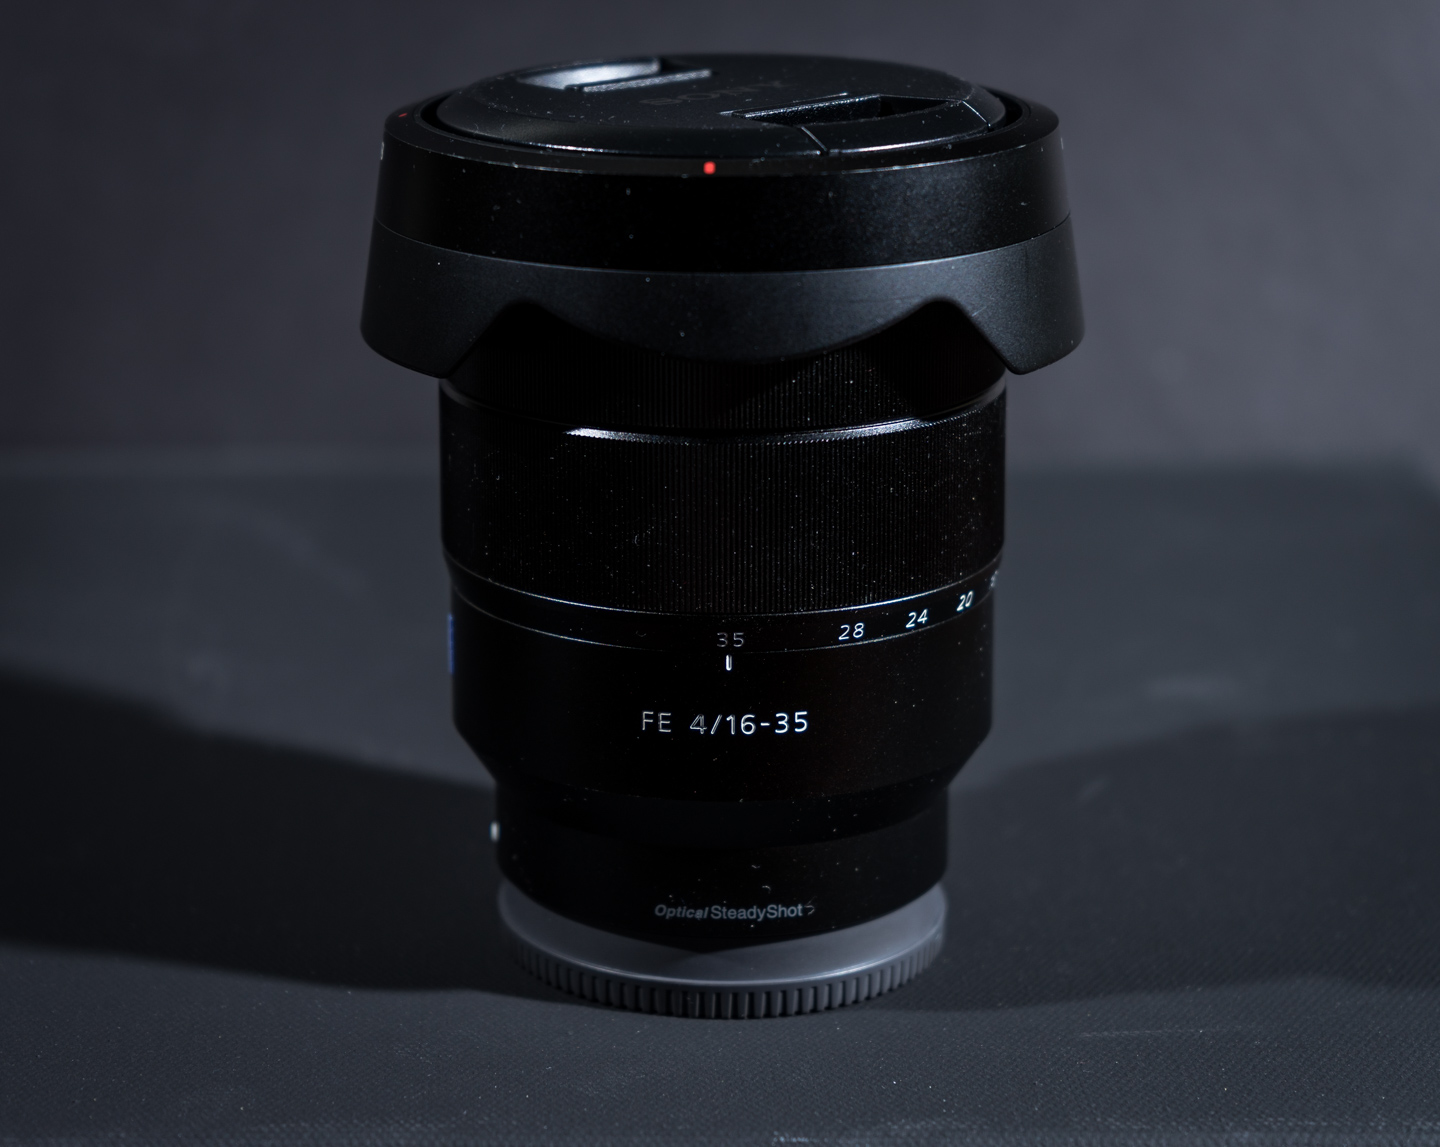 16-35mm f4, super wide angle for dramatic landscapes or architectural photography